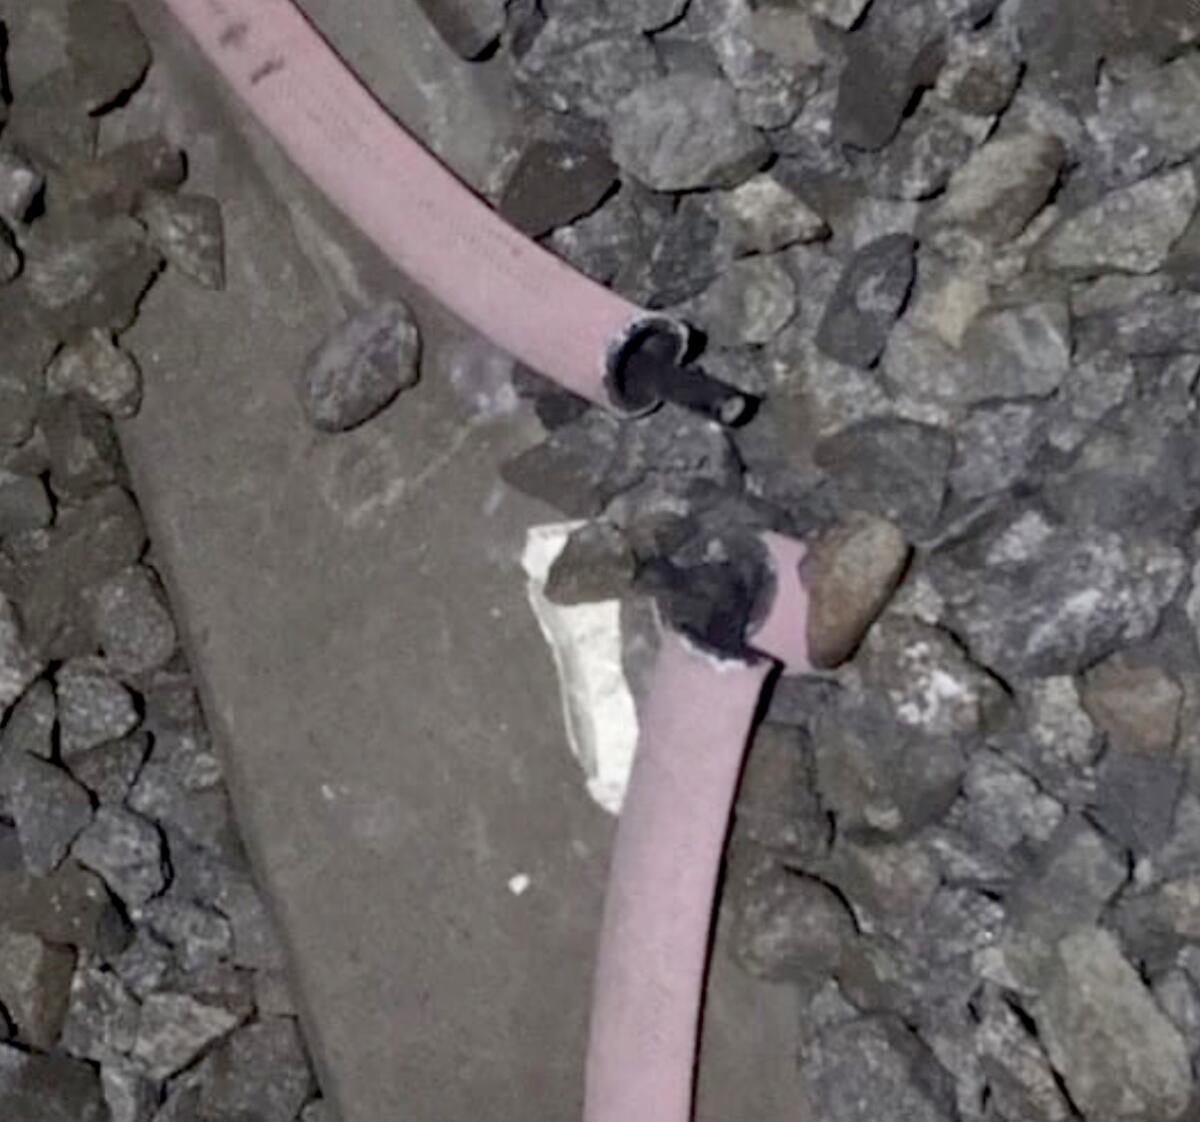 Wire sheathing left behind by copper thieves on a Metro train track